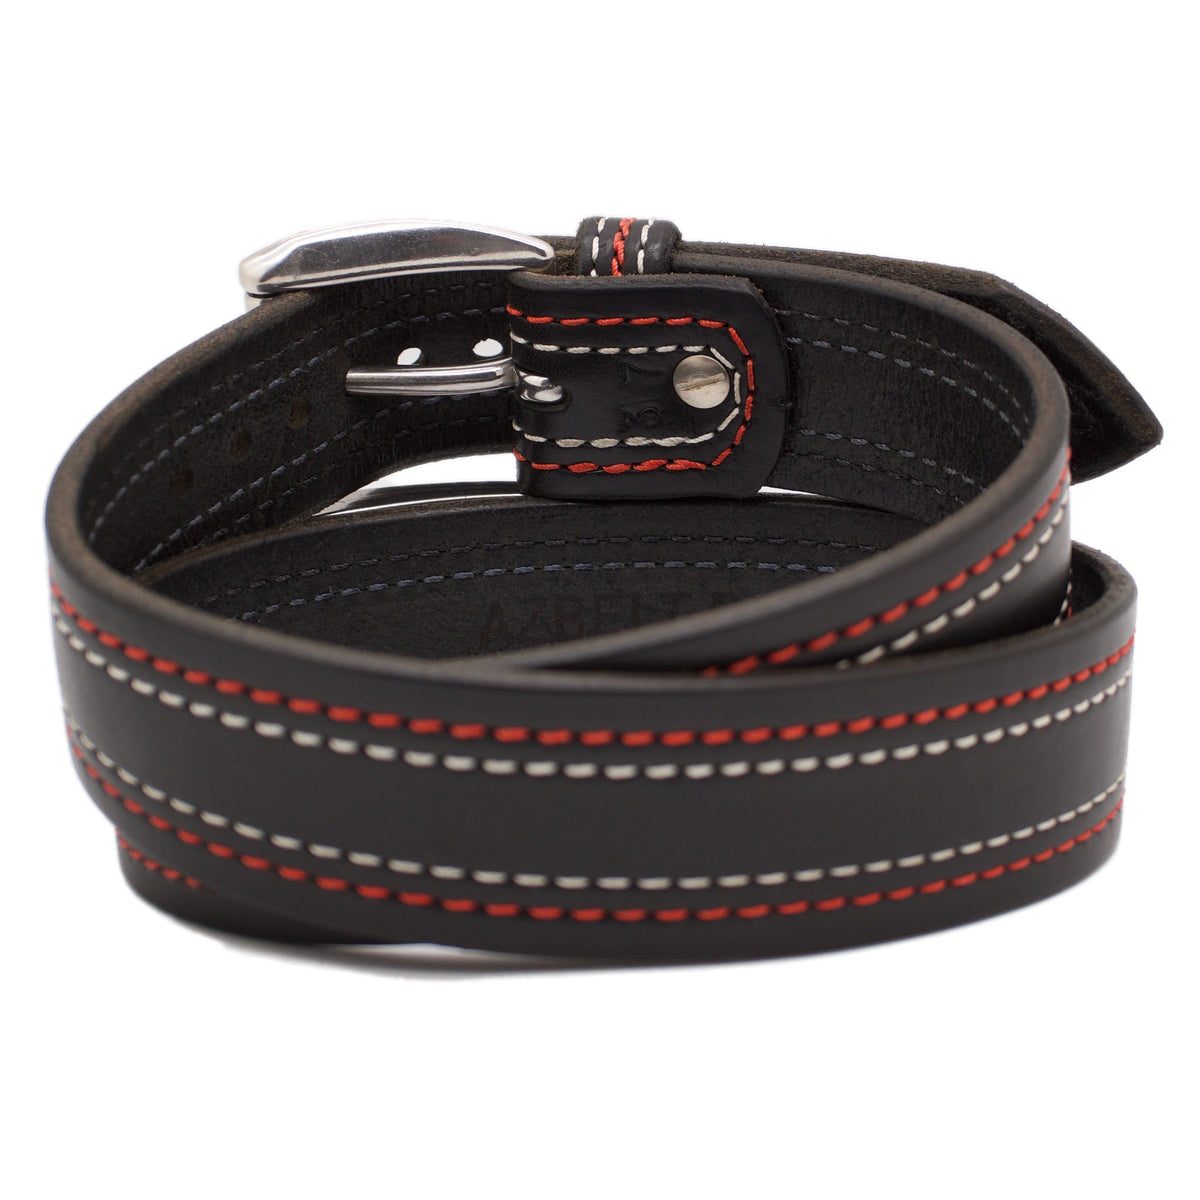 The ENZO WIDE 1.75 Leather Belt